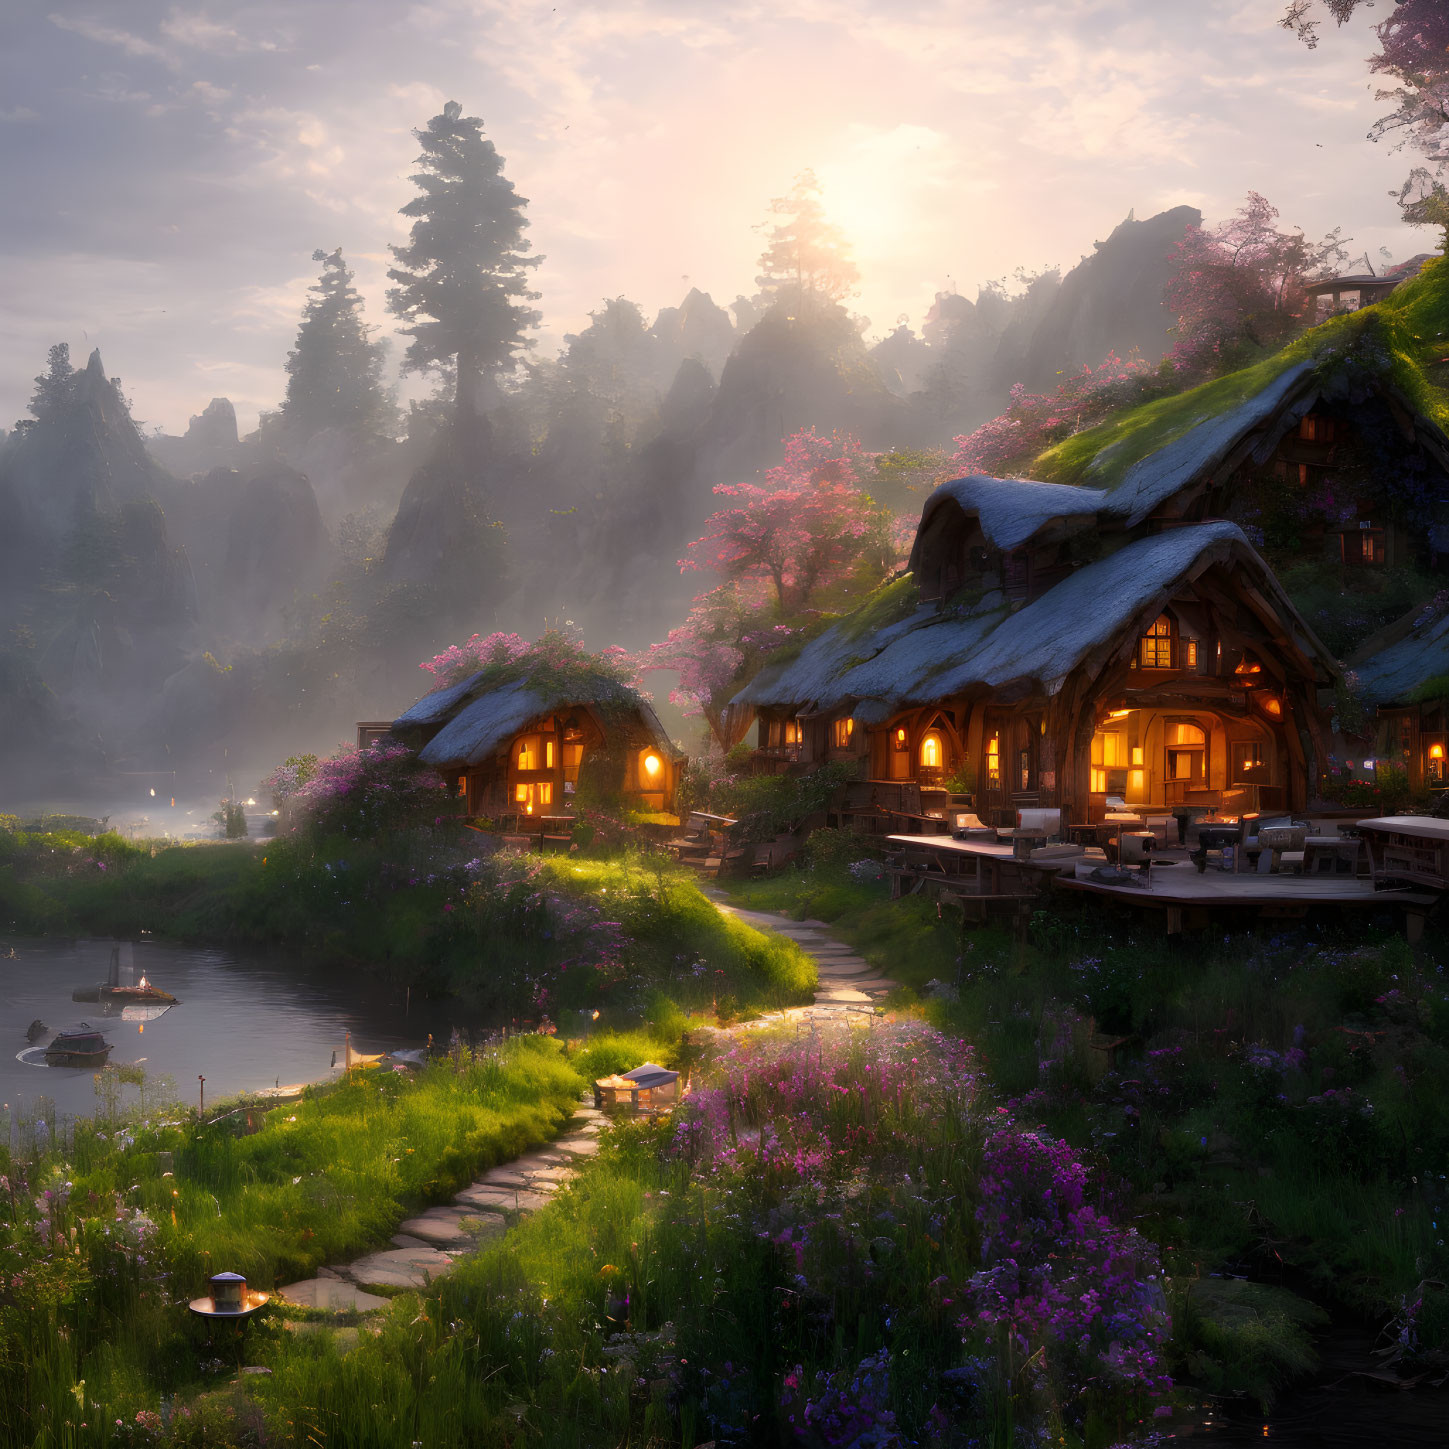 Thatched houses in serene village with glowing windows, blooming flowers, tranquil river, and misty